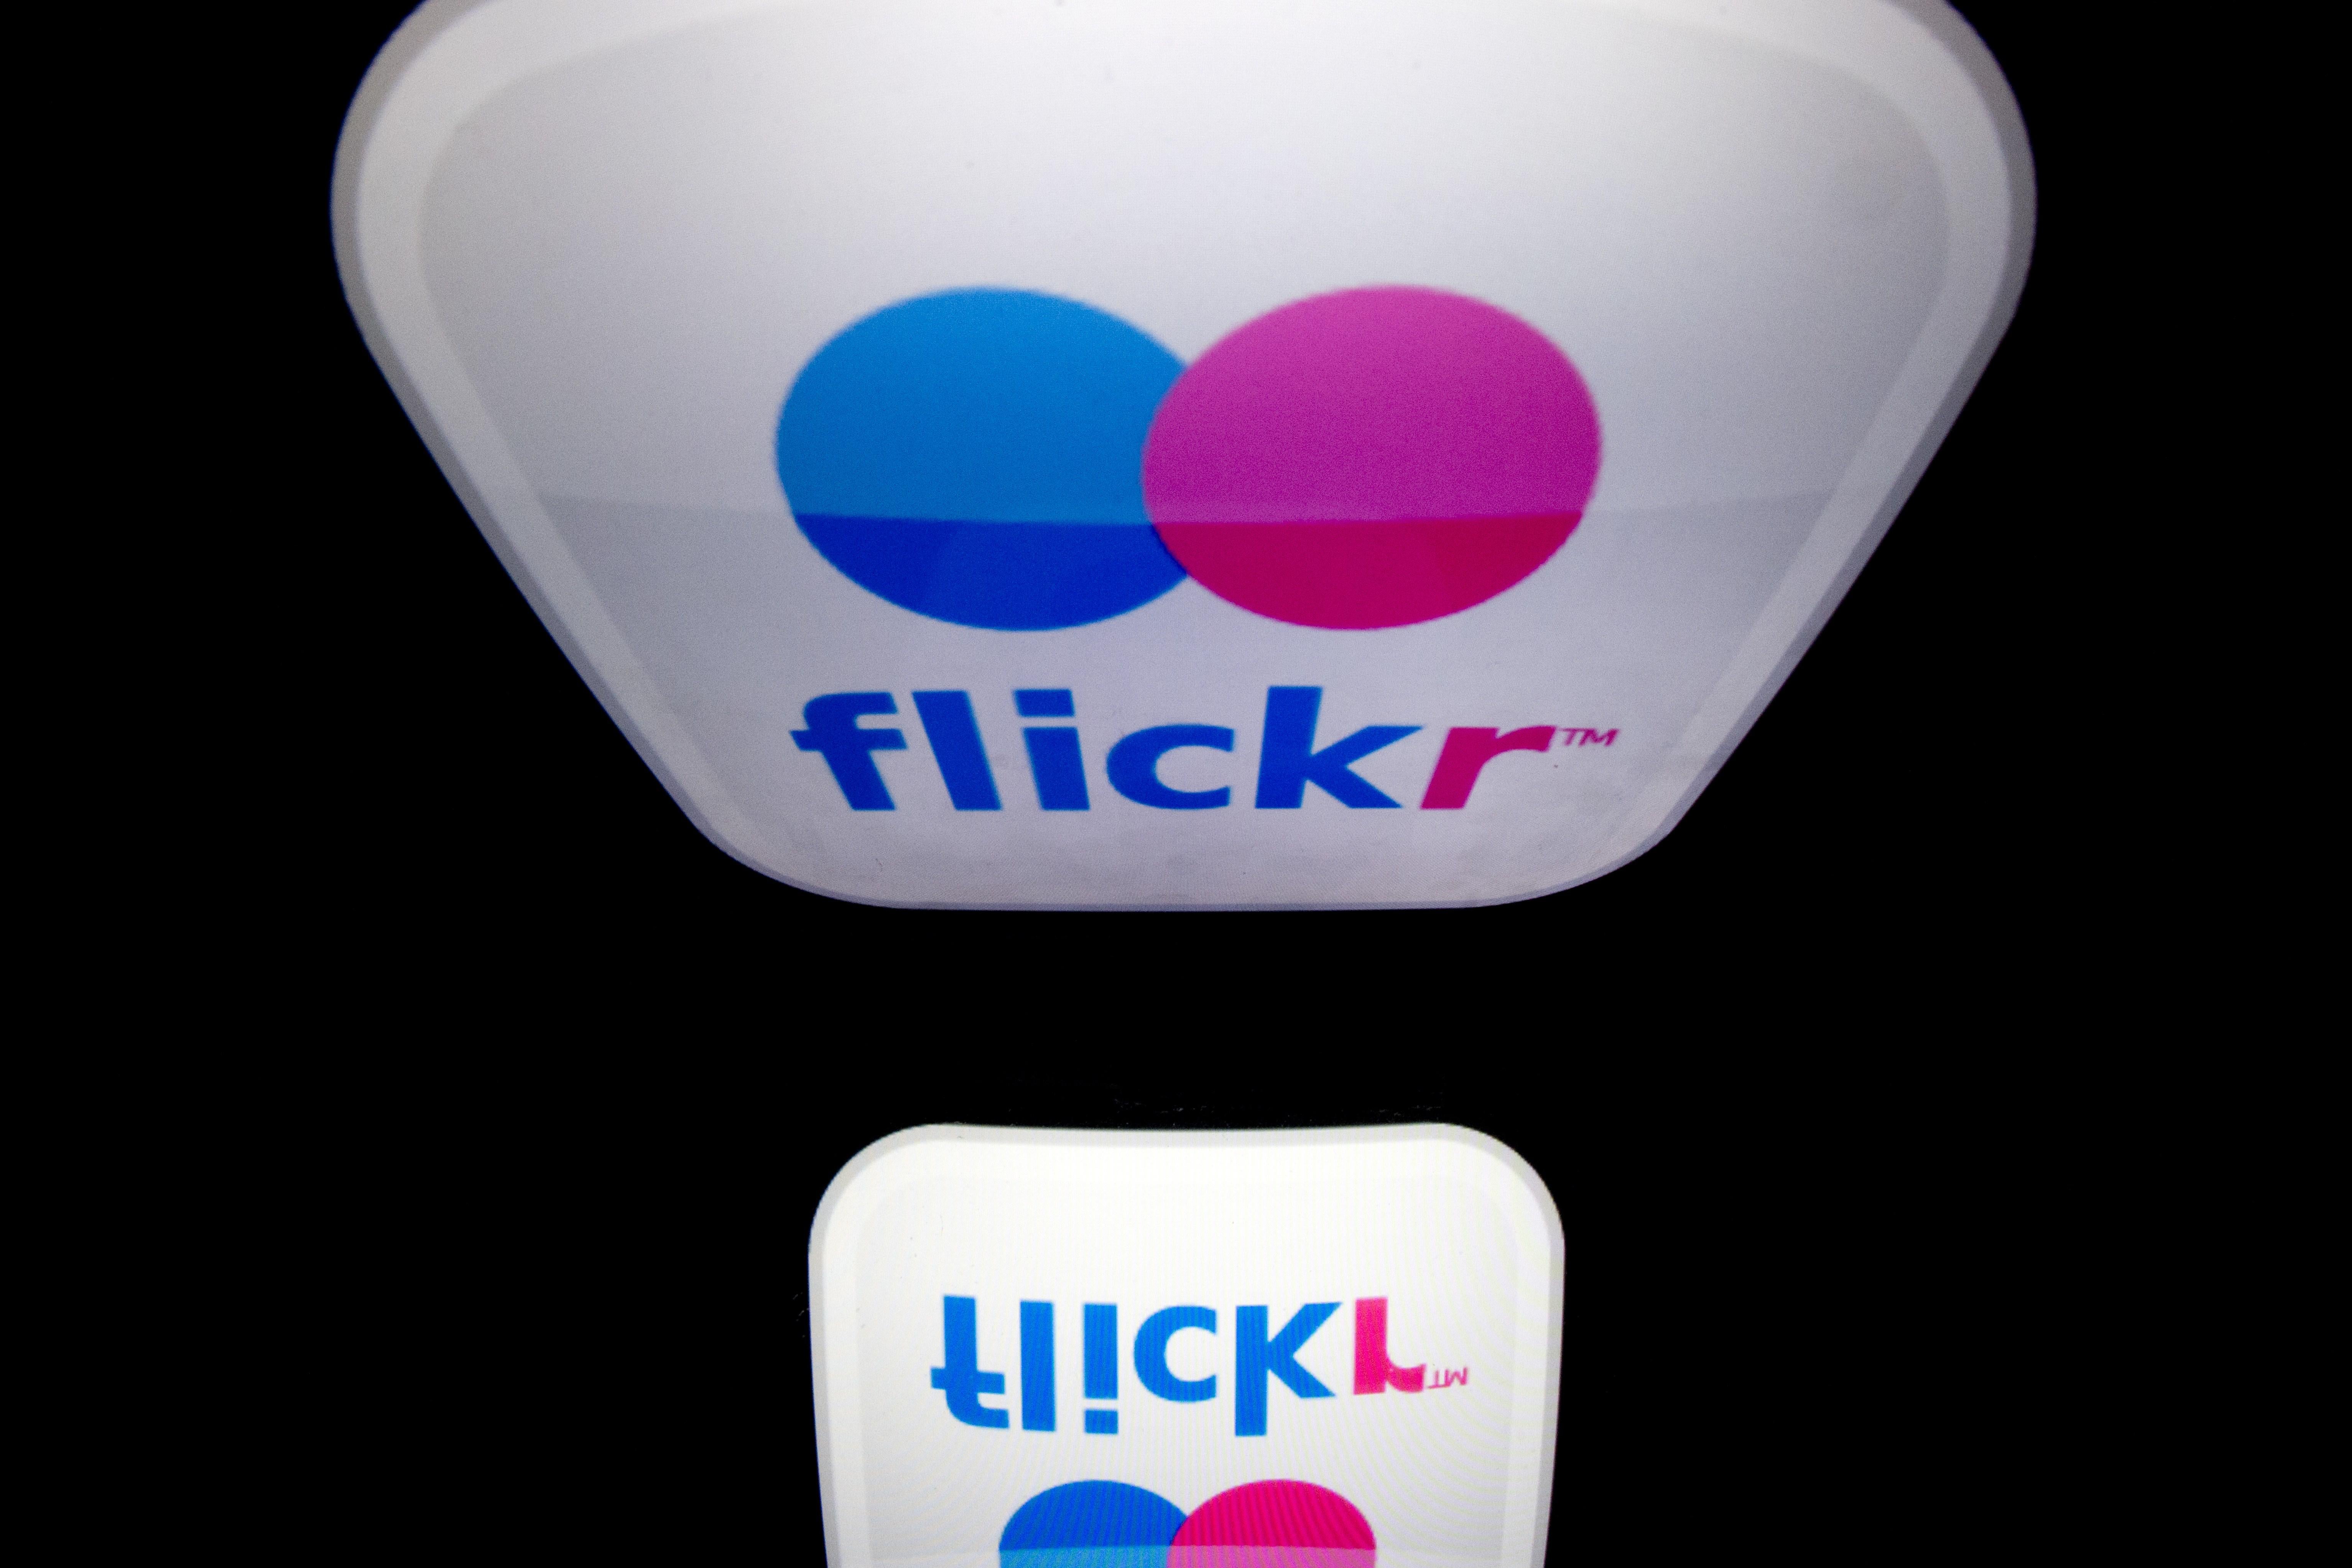 The logo of the Flickr website  is displayed on a tablet on January 2, 2014 in Paris.   AFP PHOTO / LIONEL BONAVENTURE        (Photo credit should read LIONEL BONAVENTURE/AFP/Getty Images)